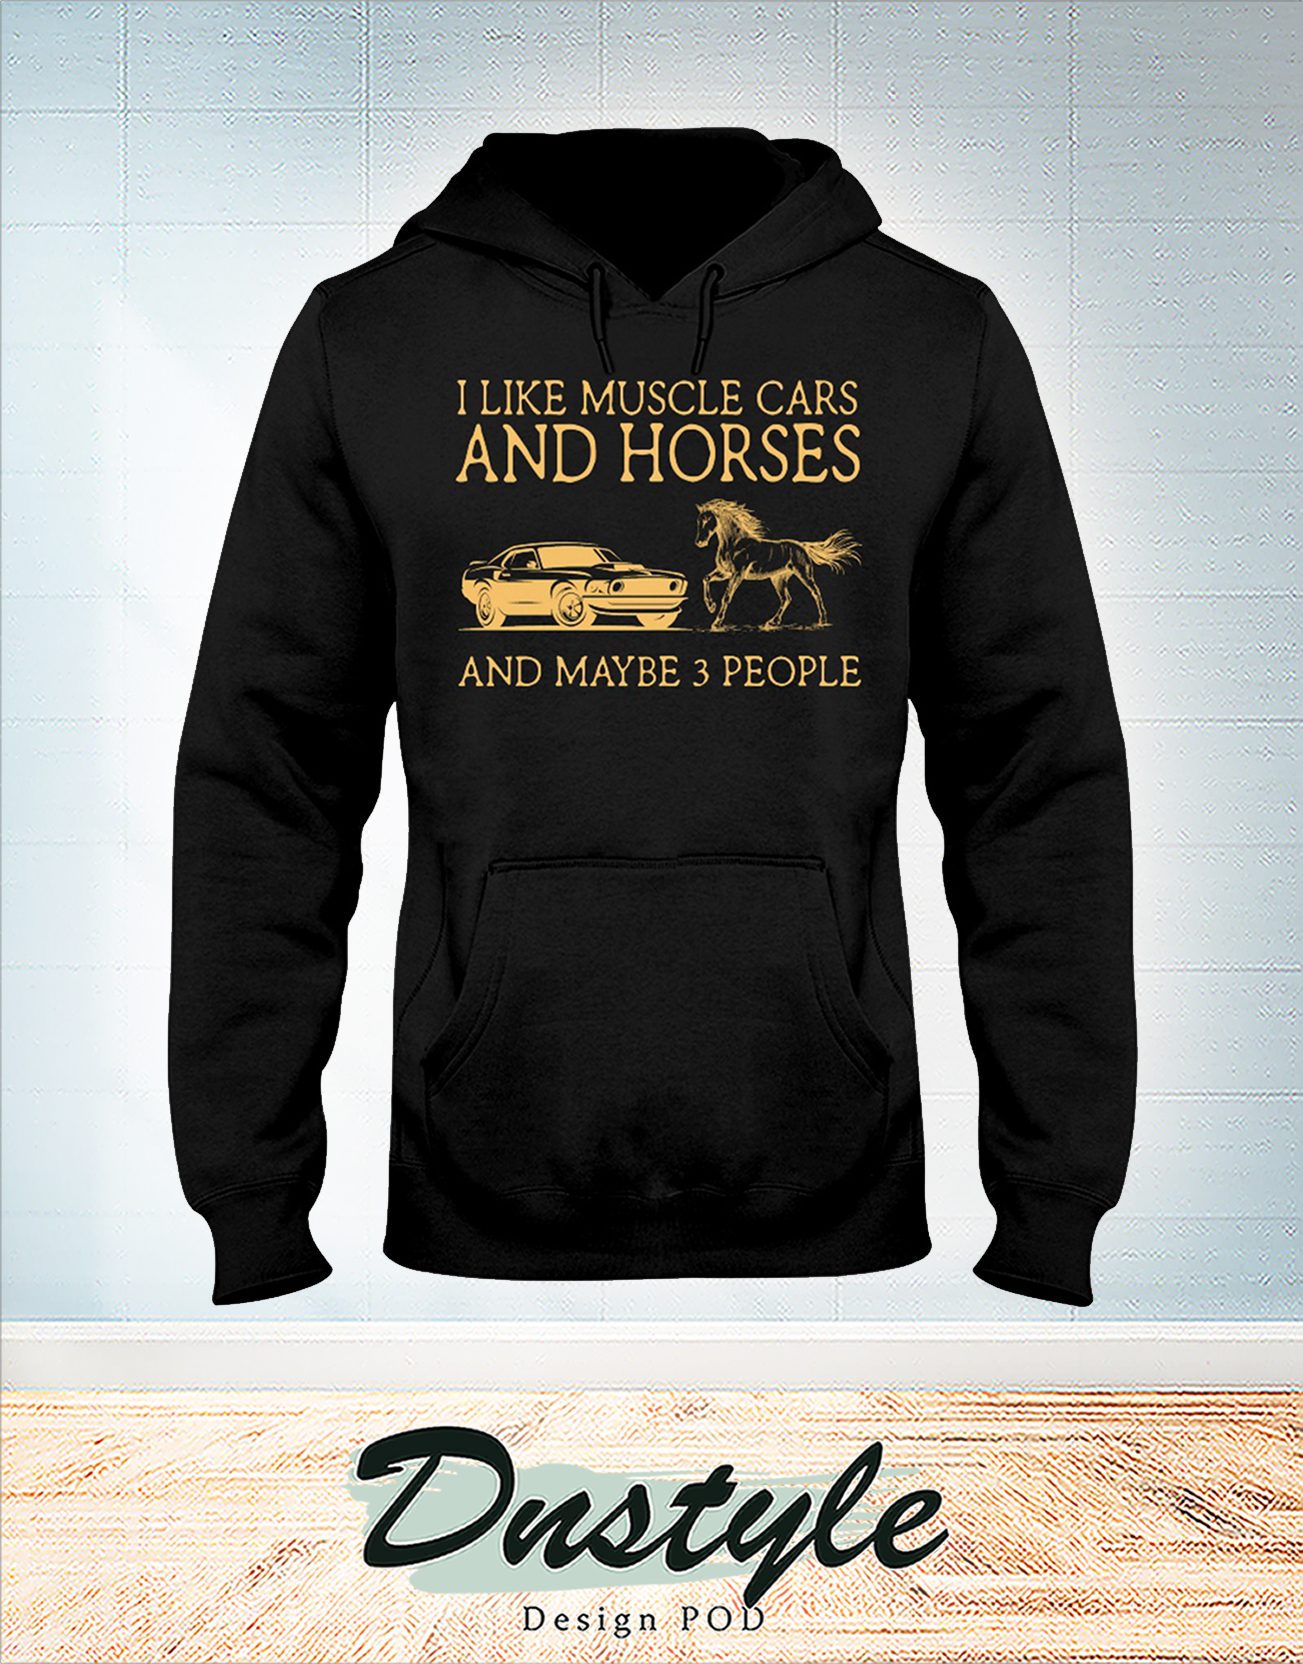 I like muscle cars and horses and maybe 3 people hoodie